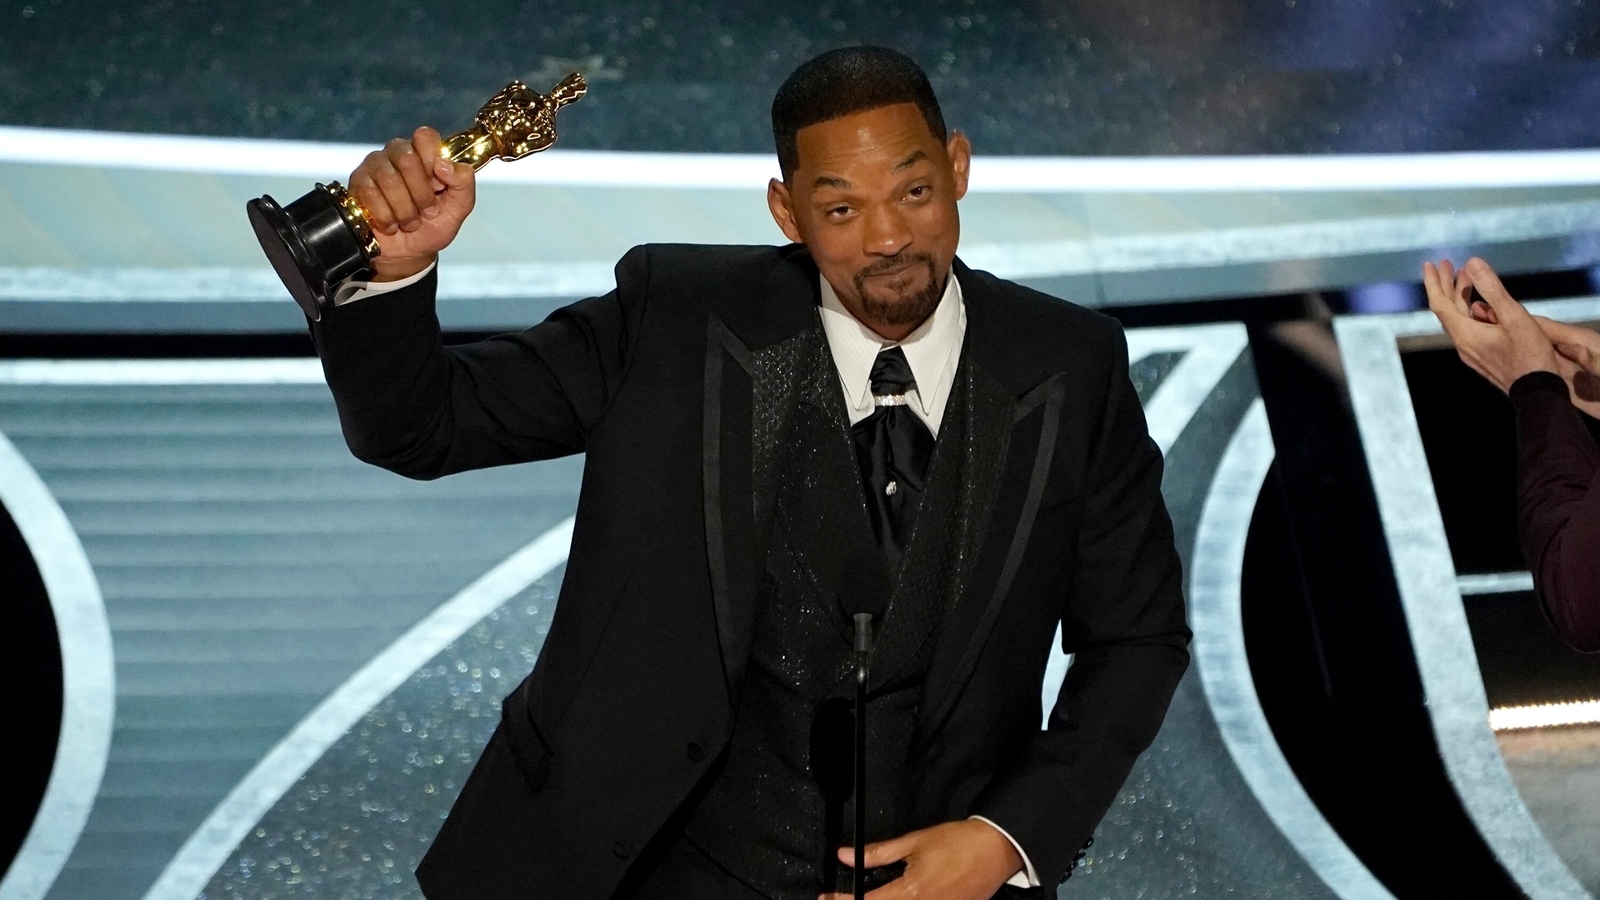 Academy reveals Will Smith ‘was asked to leave the ceremony but refused’ after slapping Chris Rock